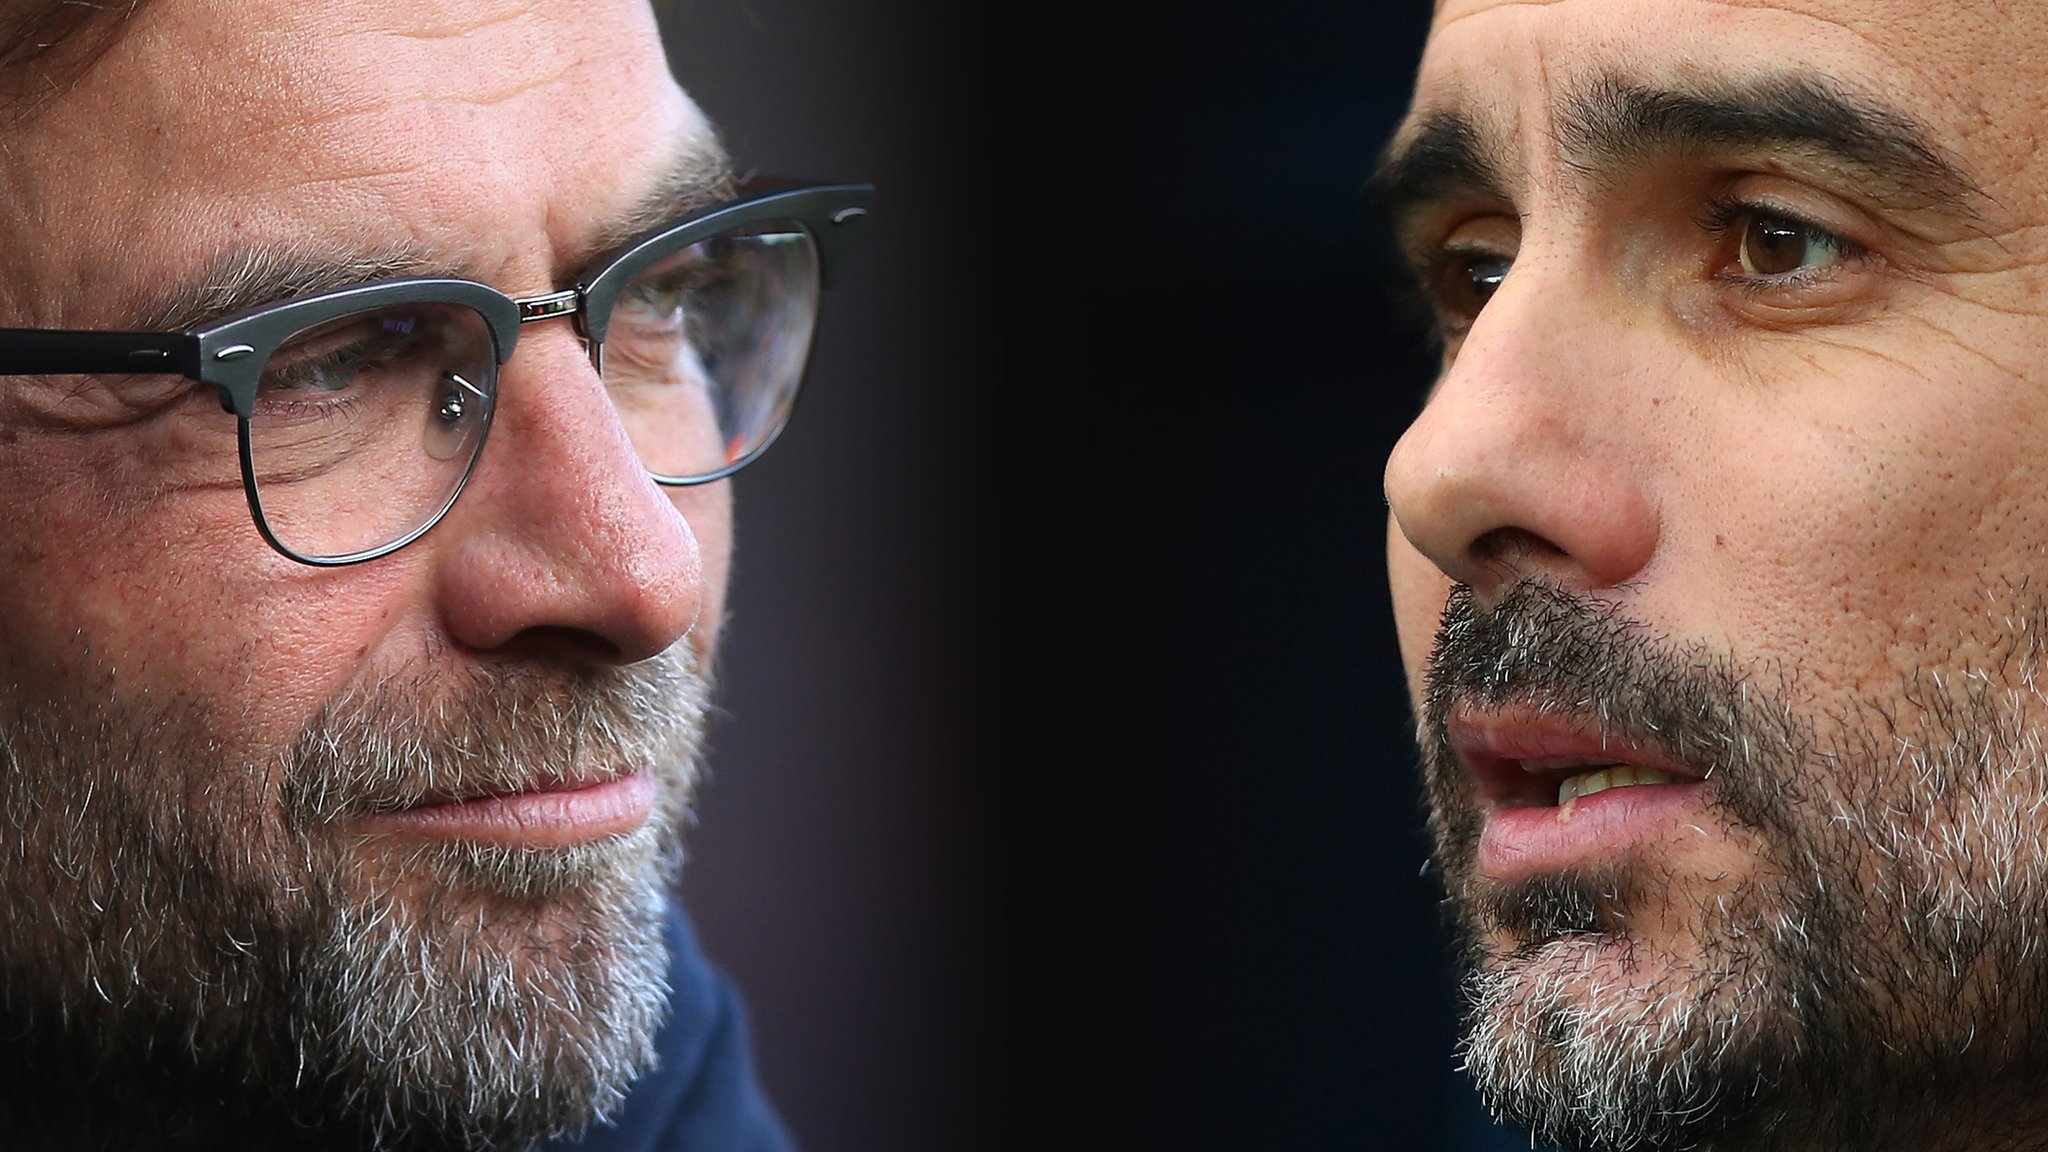 Liverpool to play Man City in Champions League quarter-final